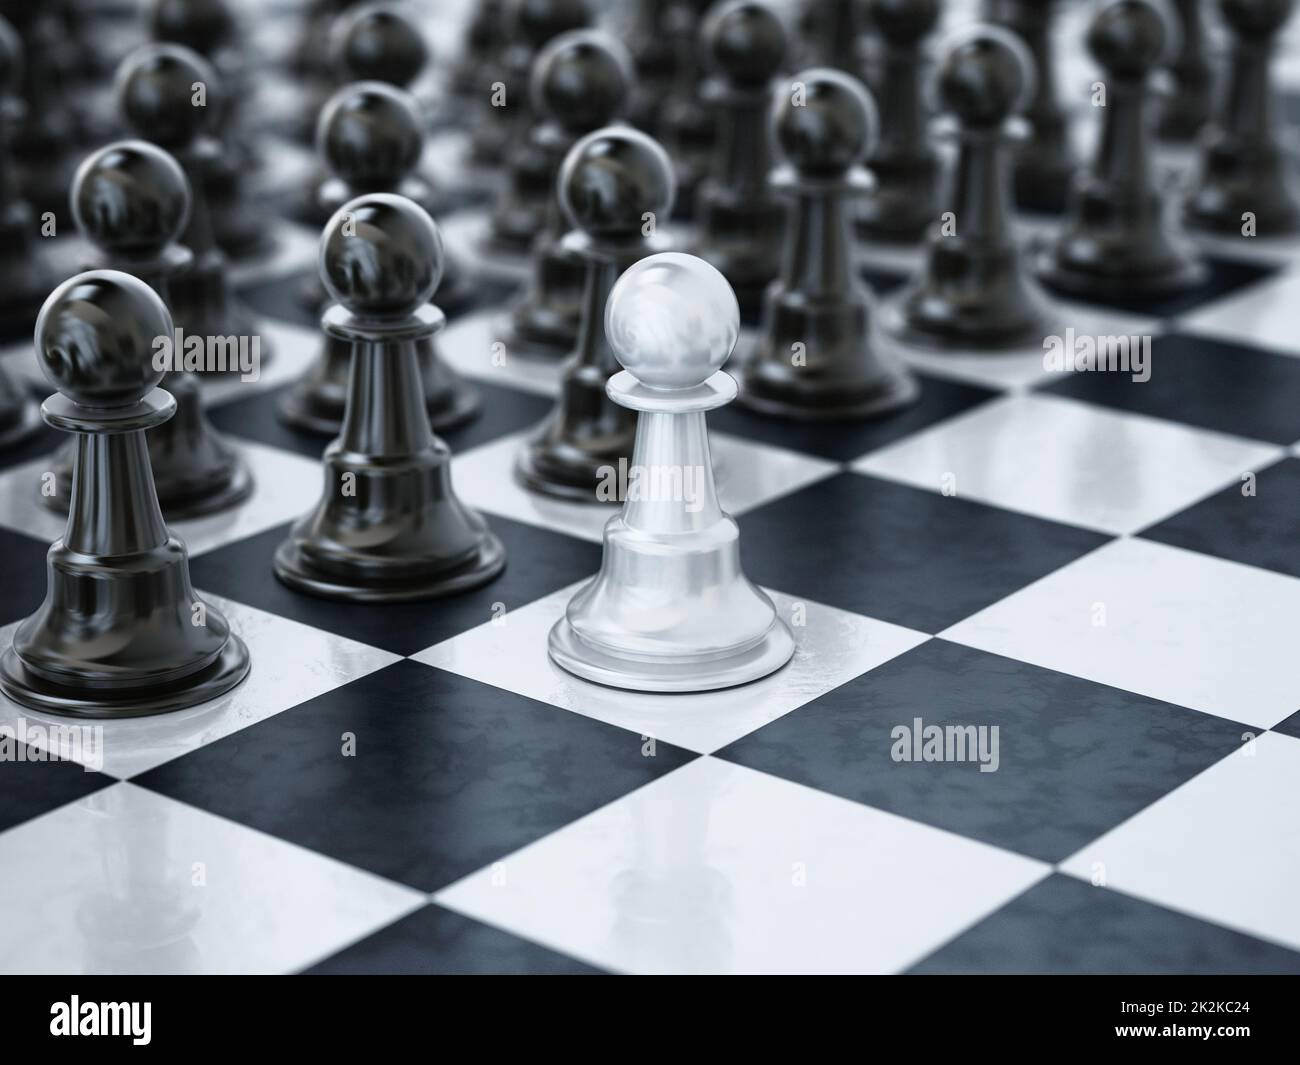 White chess pawn standing one square ahead of black chess pieces. 3D illustration Stock Photo